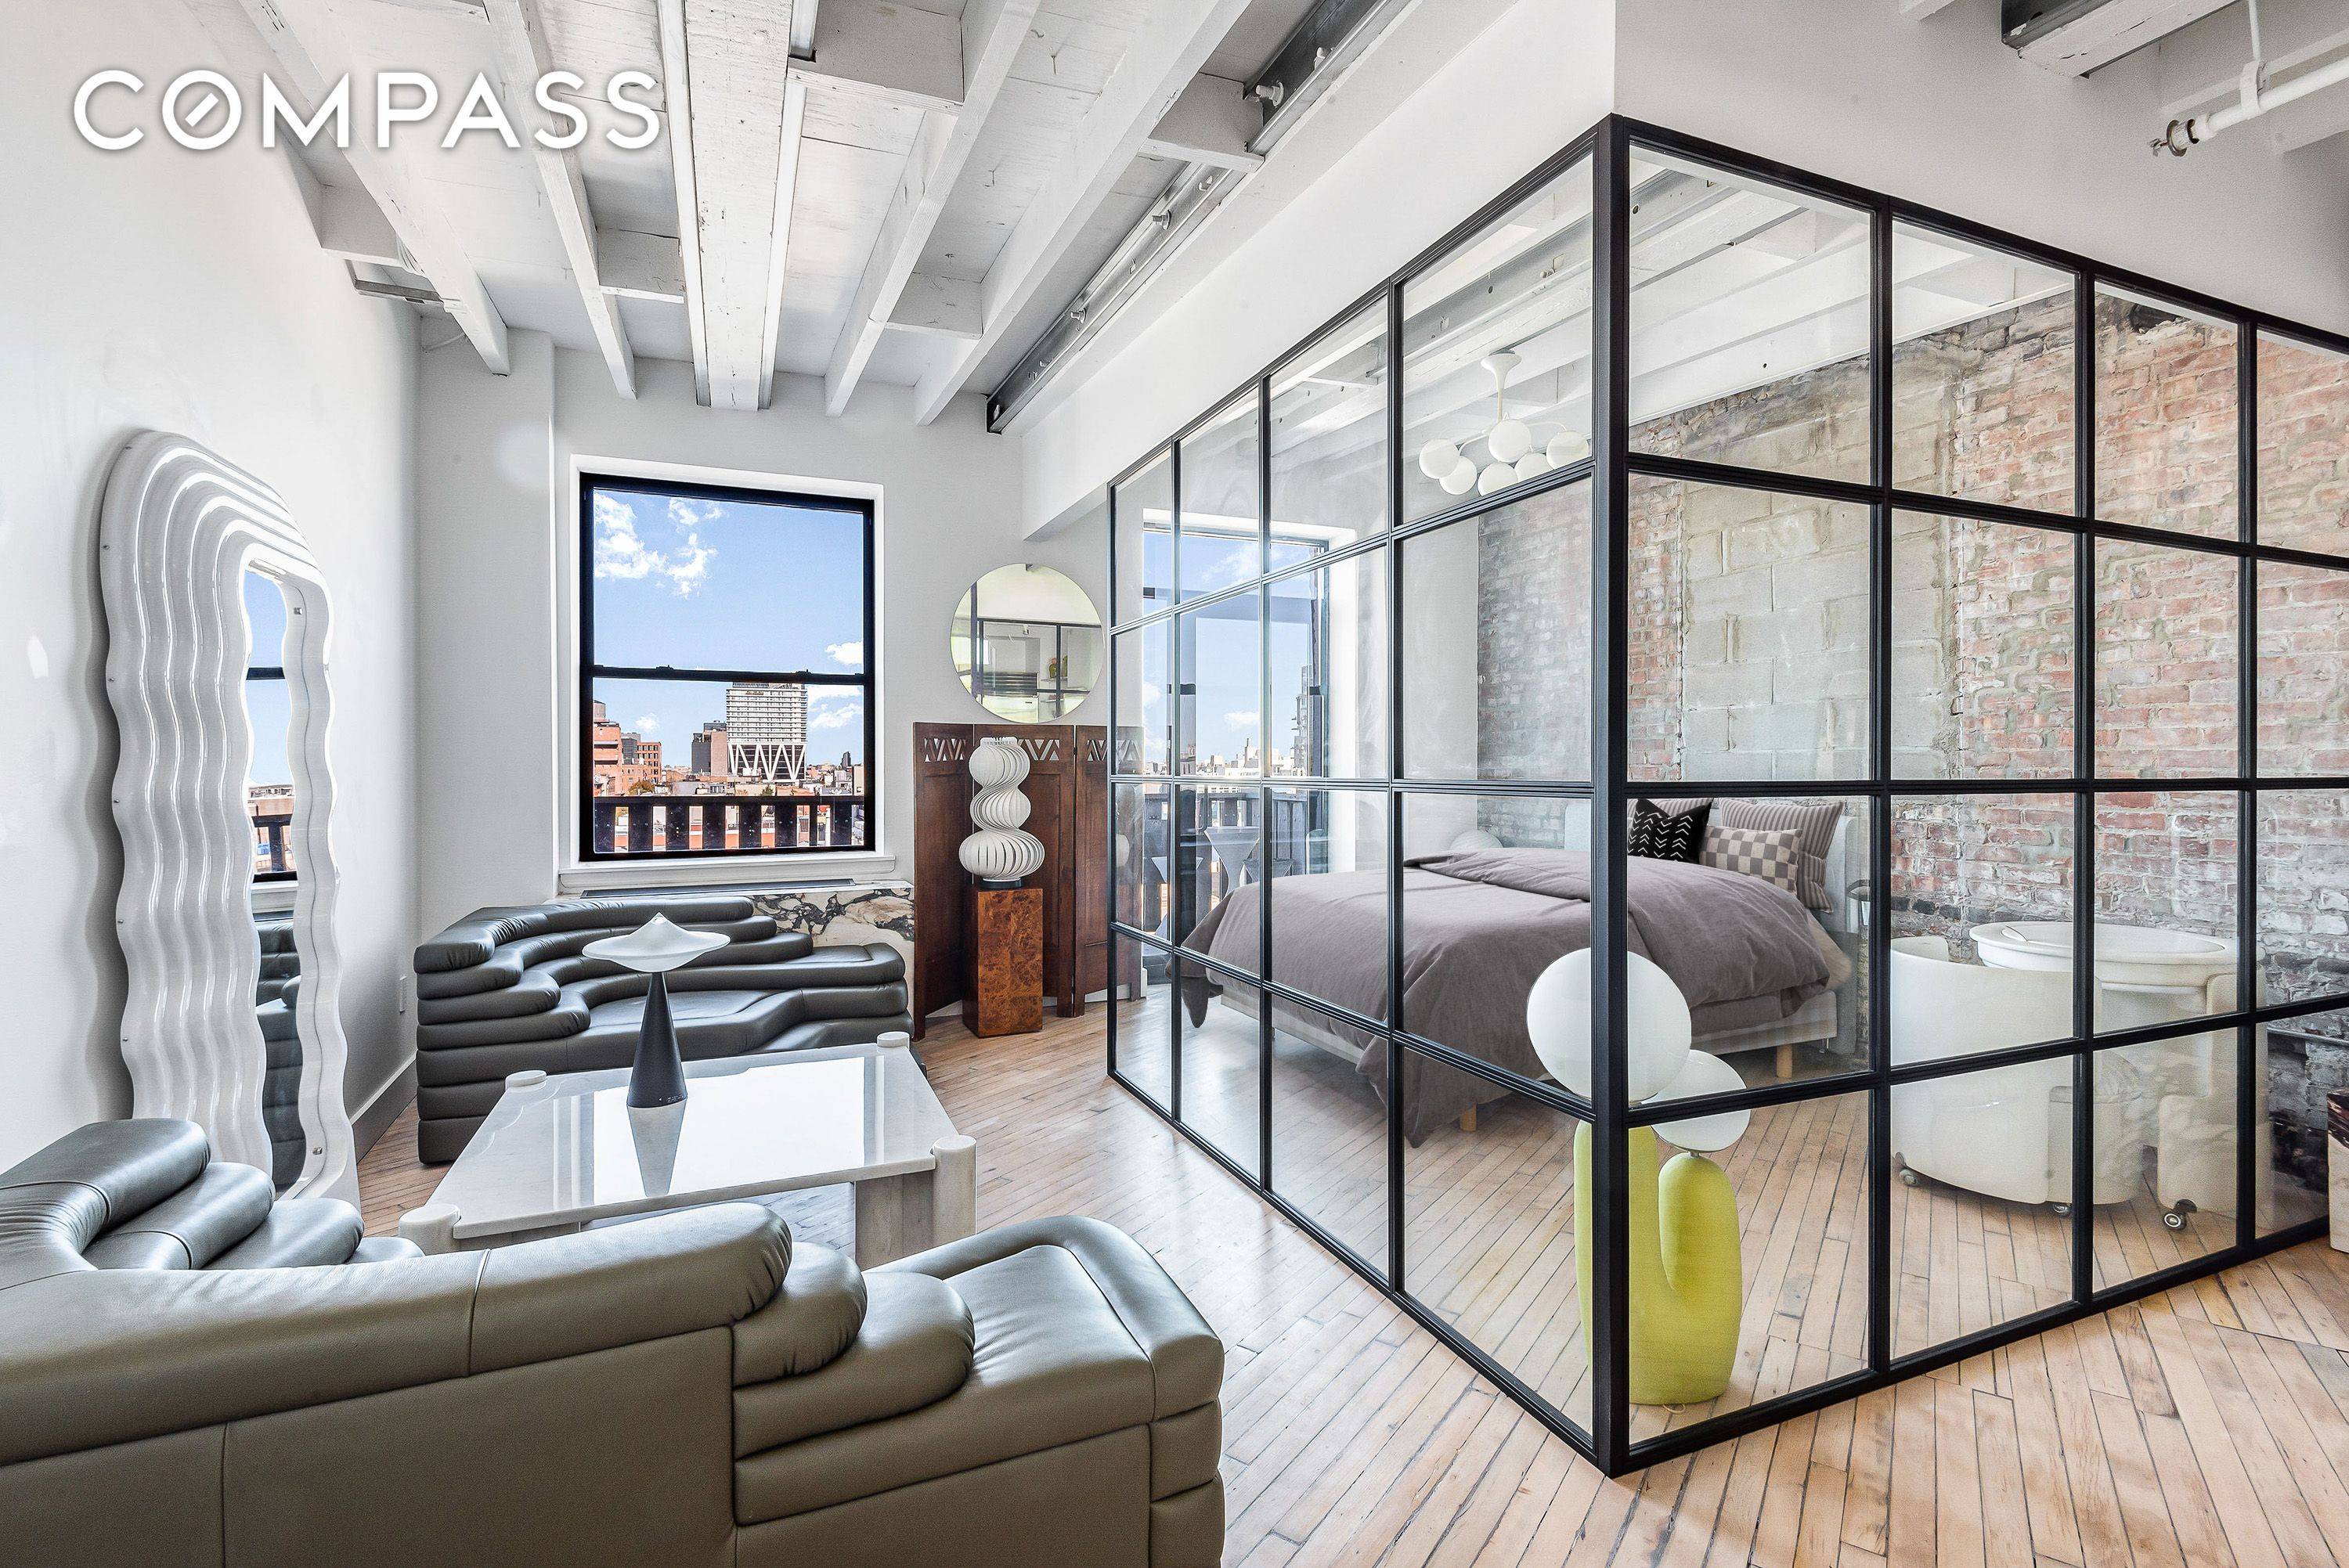 This truly unique studio loft with a large balcony and open views is situated on the top floor of The Mill Building, Williamsburg s premier pre war doorman building.